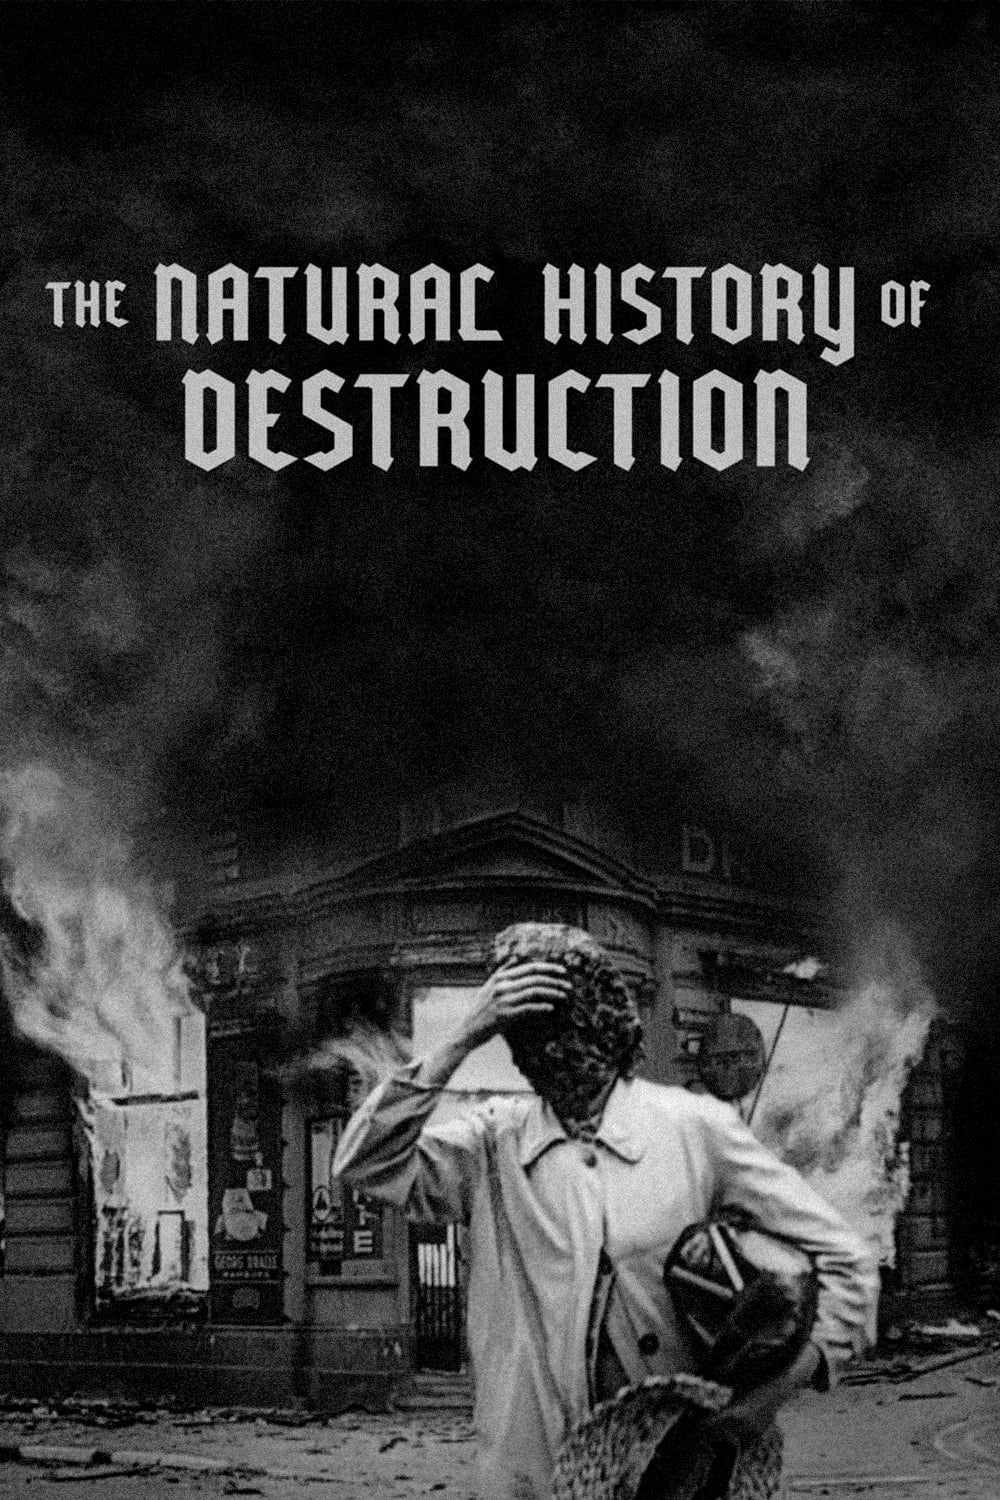 The Natural History of Destruction